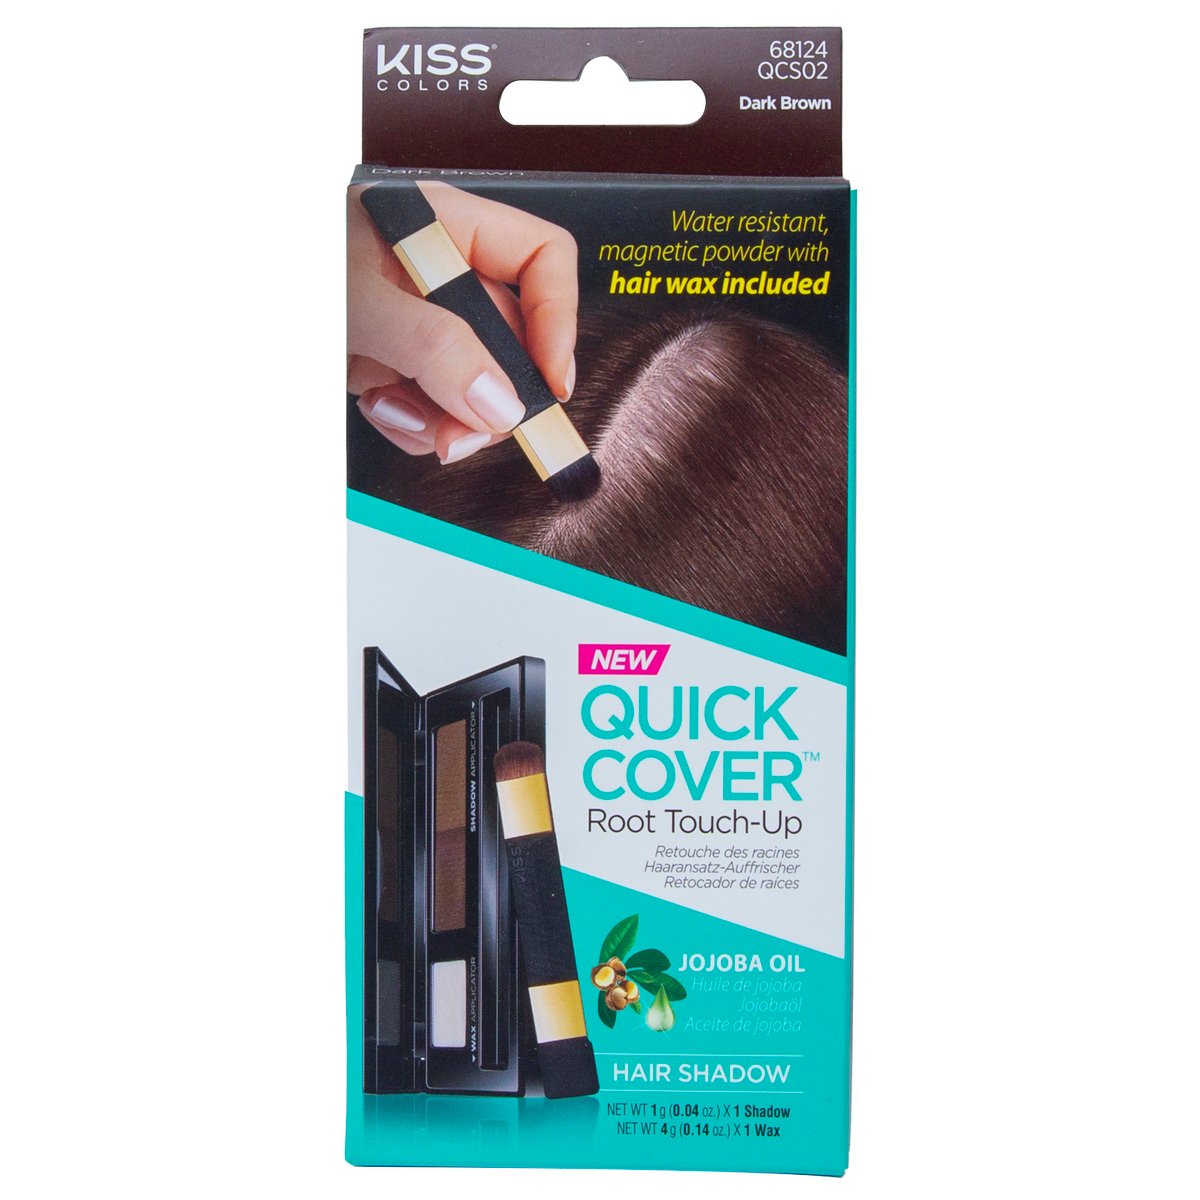 Kiss Quick Cover Root Touch Up Jojoba Oil Dark Brown, 1 pkt